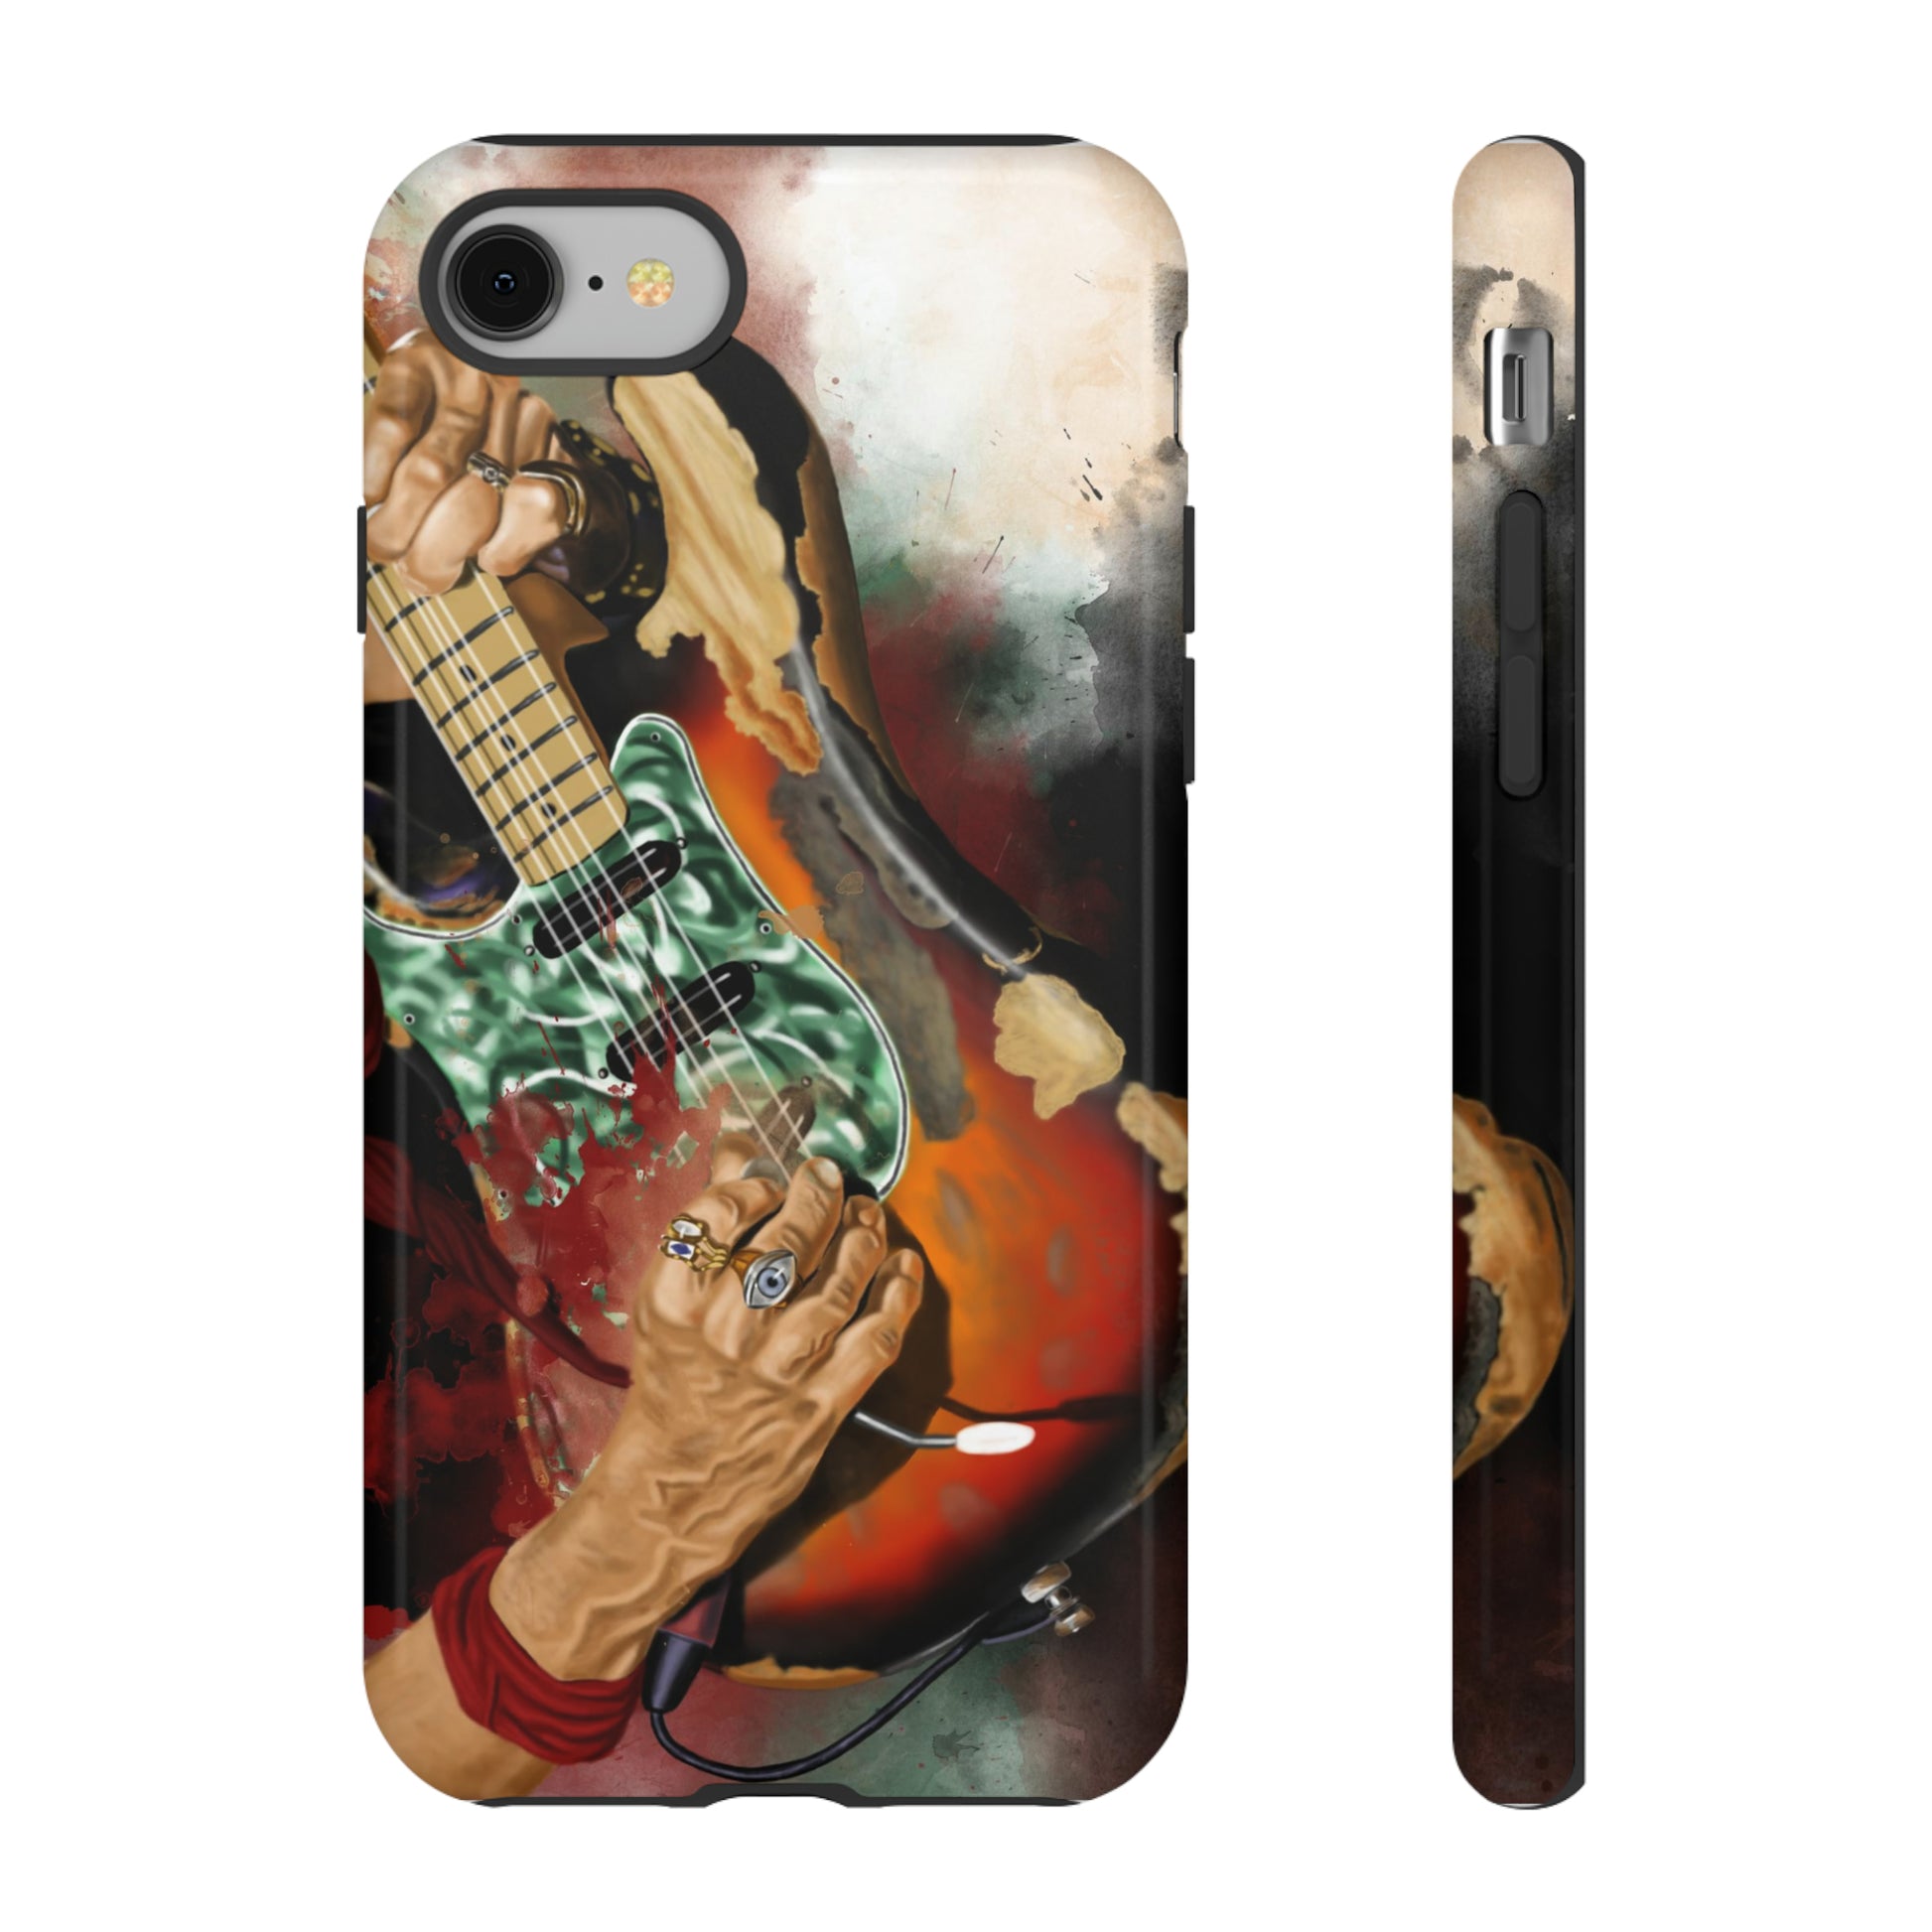 Digital painting of vintage electric guitar with hands printed on iphone phone case